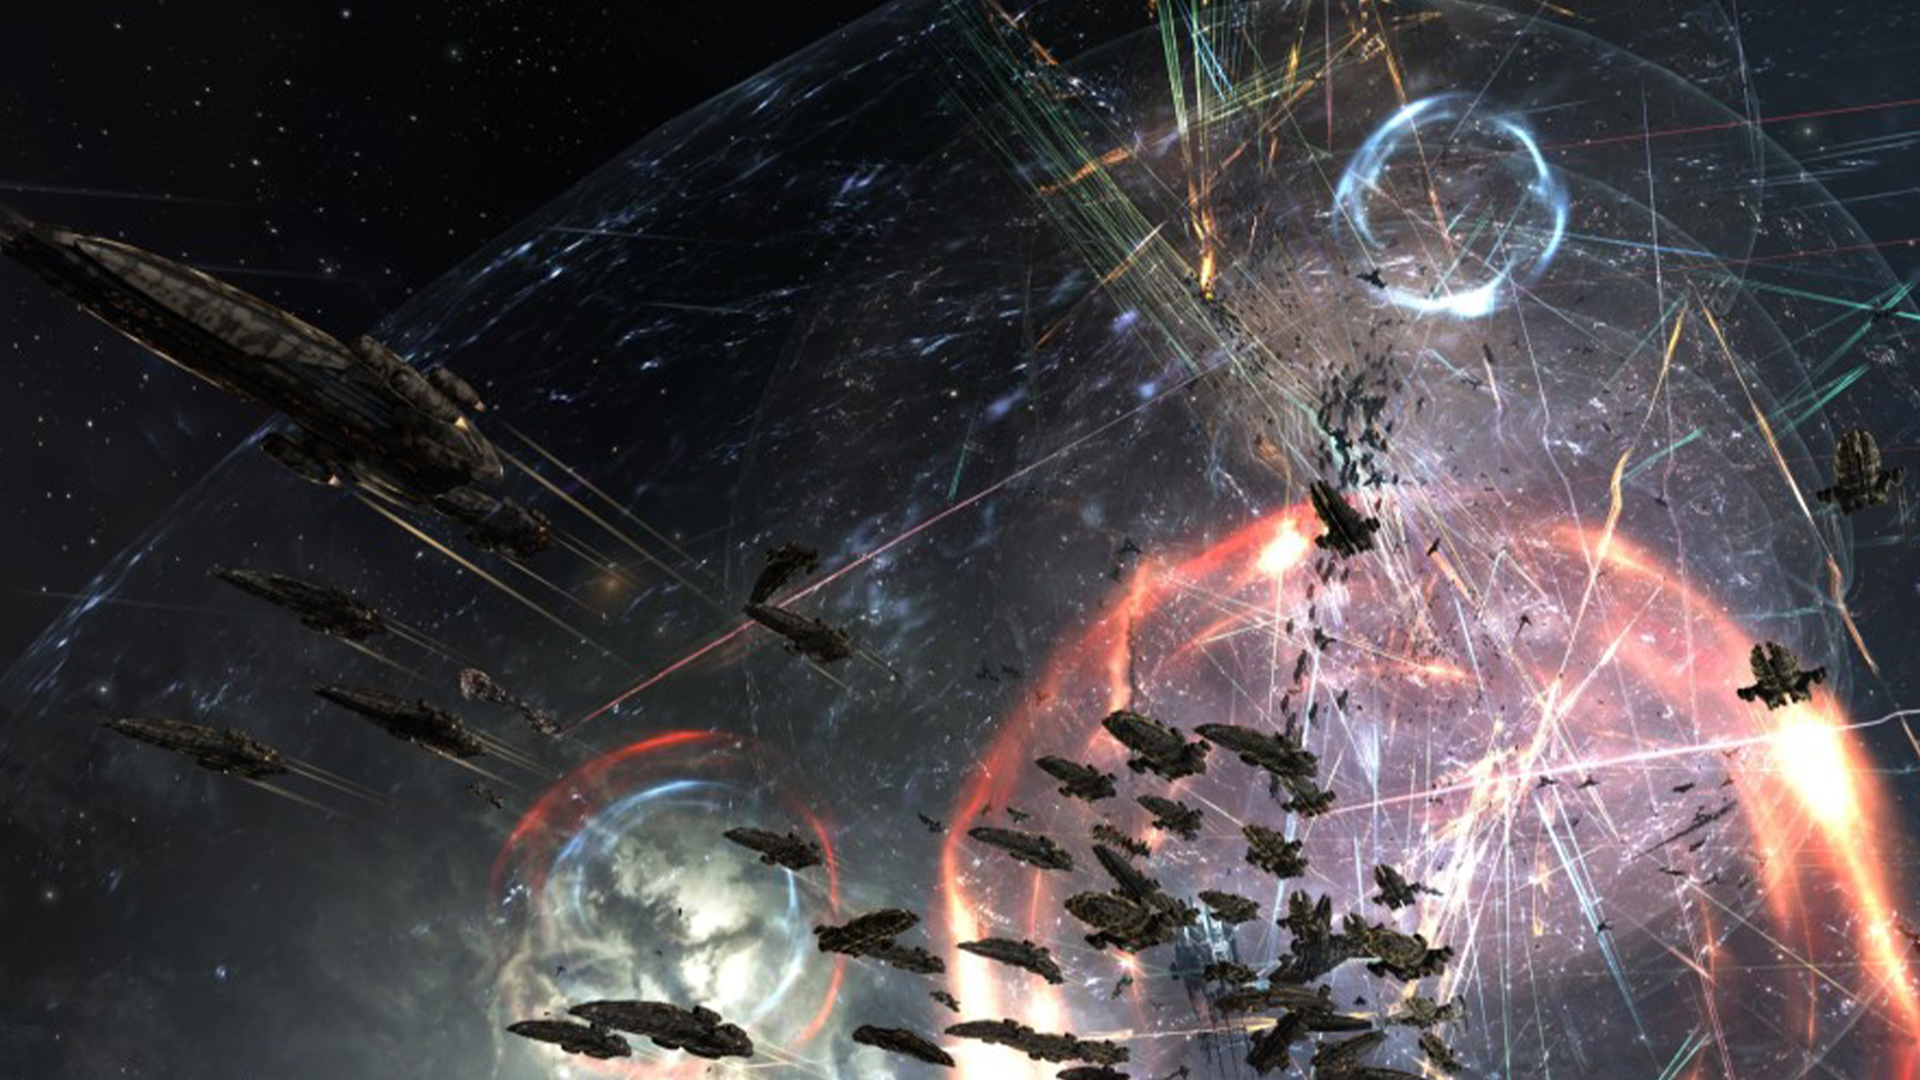 Eve Online players rocked by unprecedented NPC attack